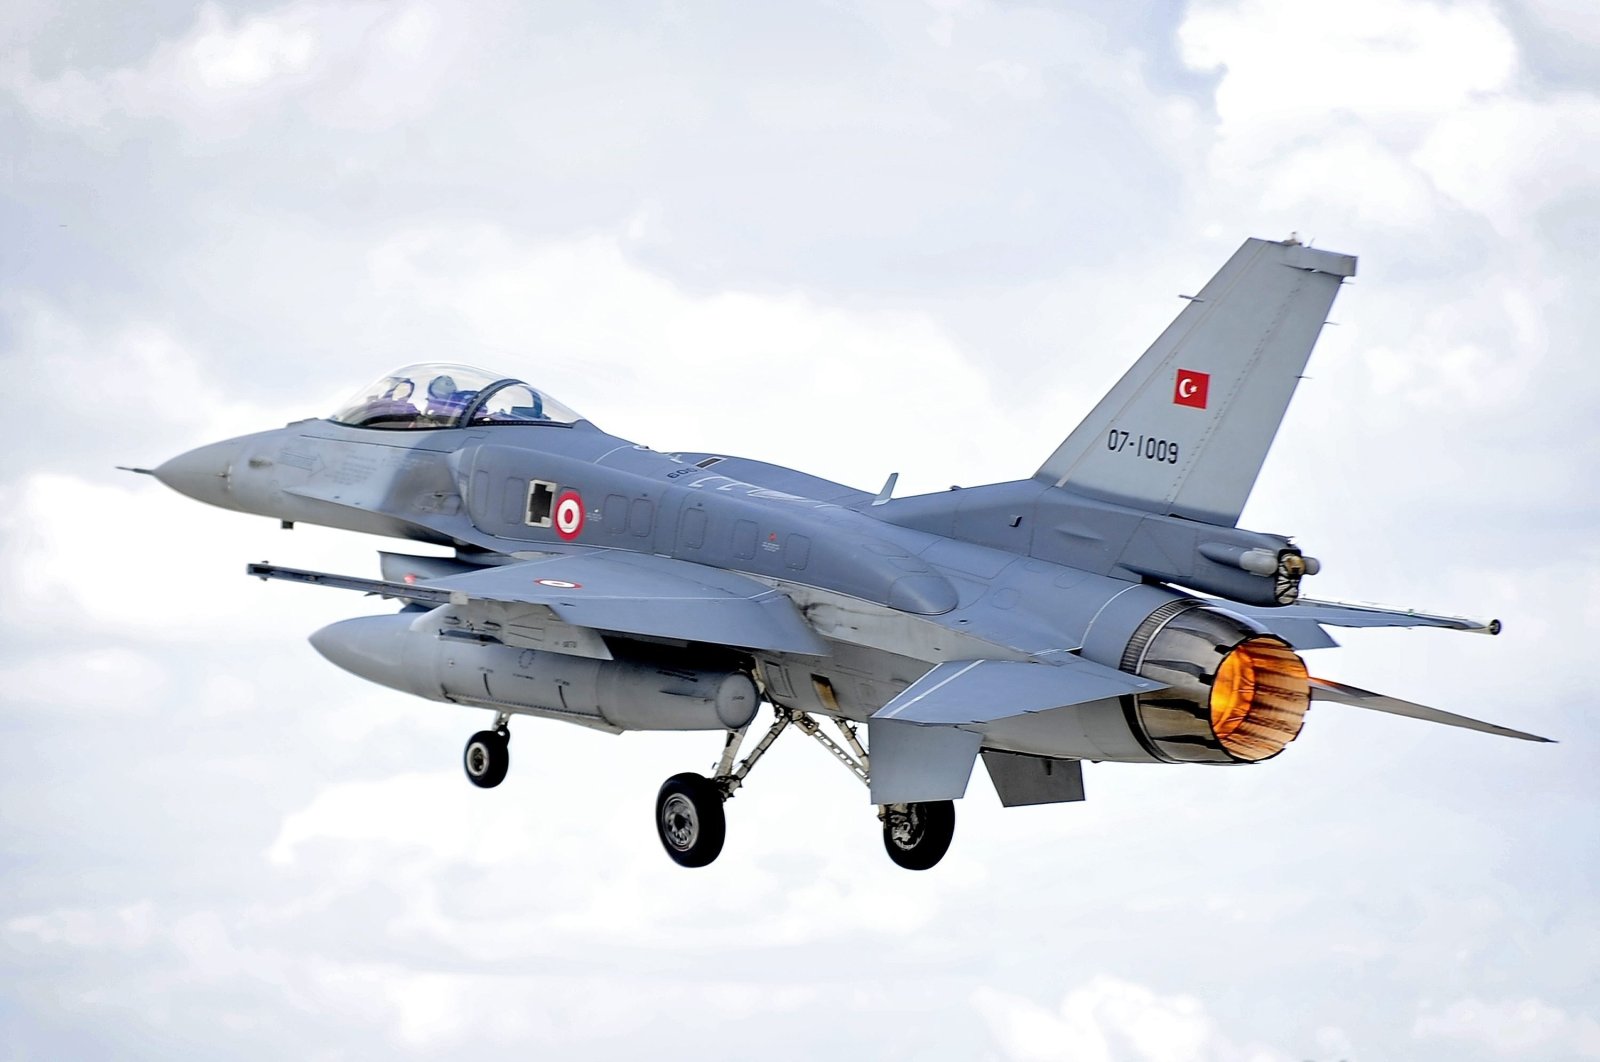 An F-16 Fighting Falcon of the Turkish Air Force takes off on a sortie from an air base during Exercise Anatolian Eagle, in Konya, Türkiye. (Turkish Defense Ministry Handout)